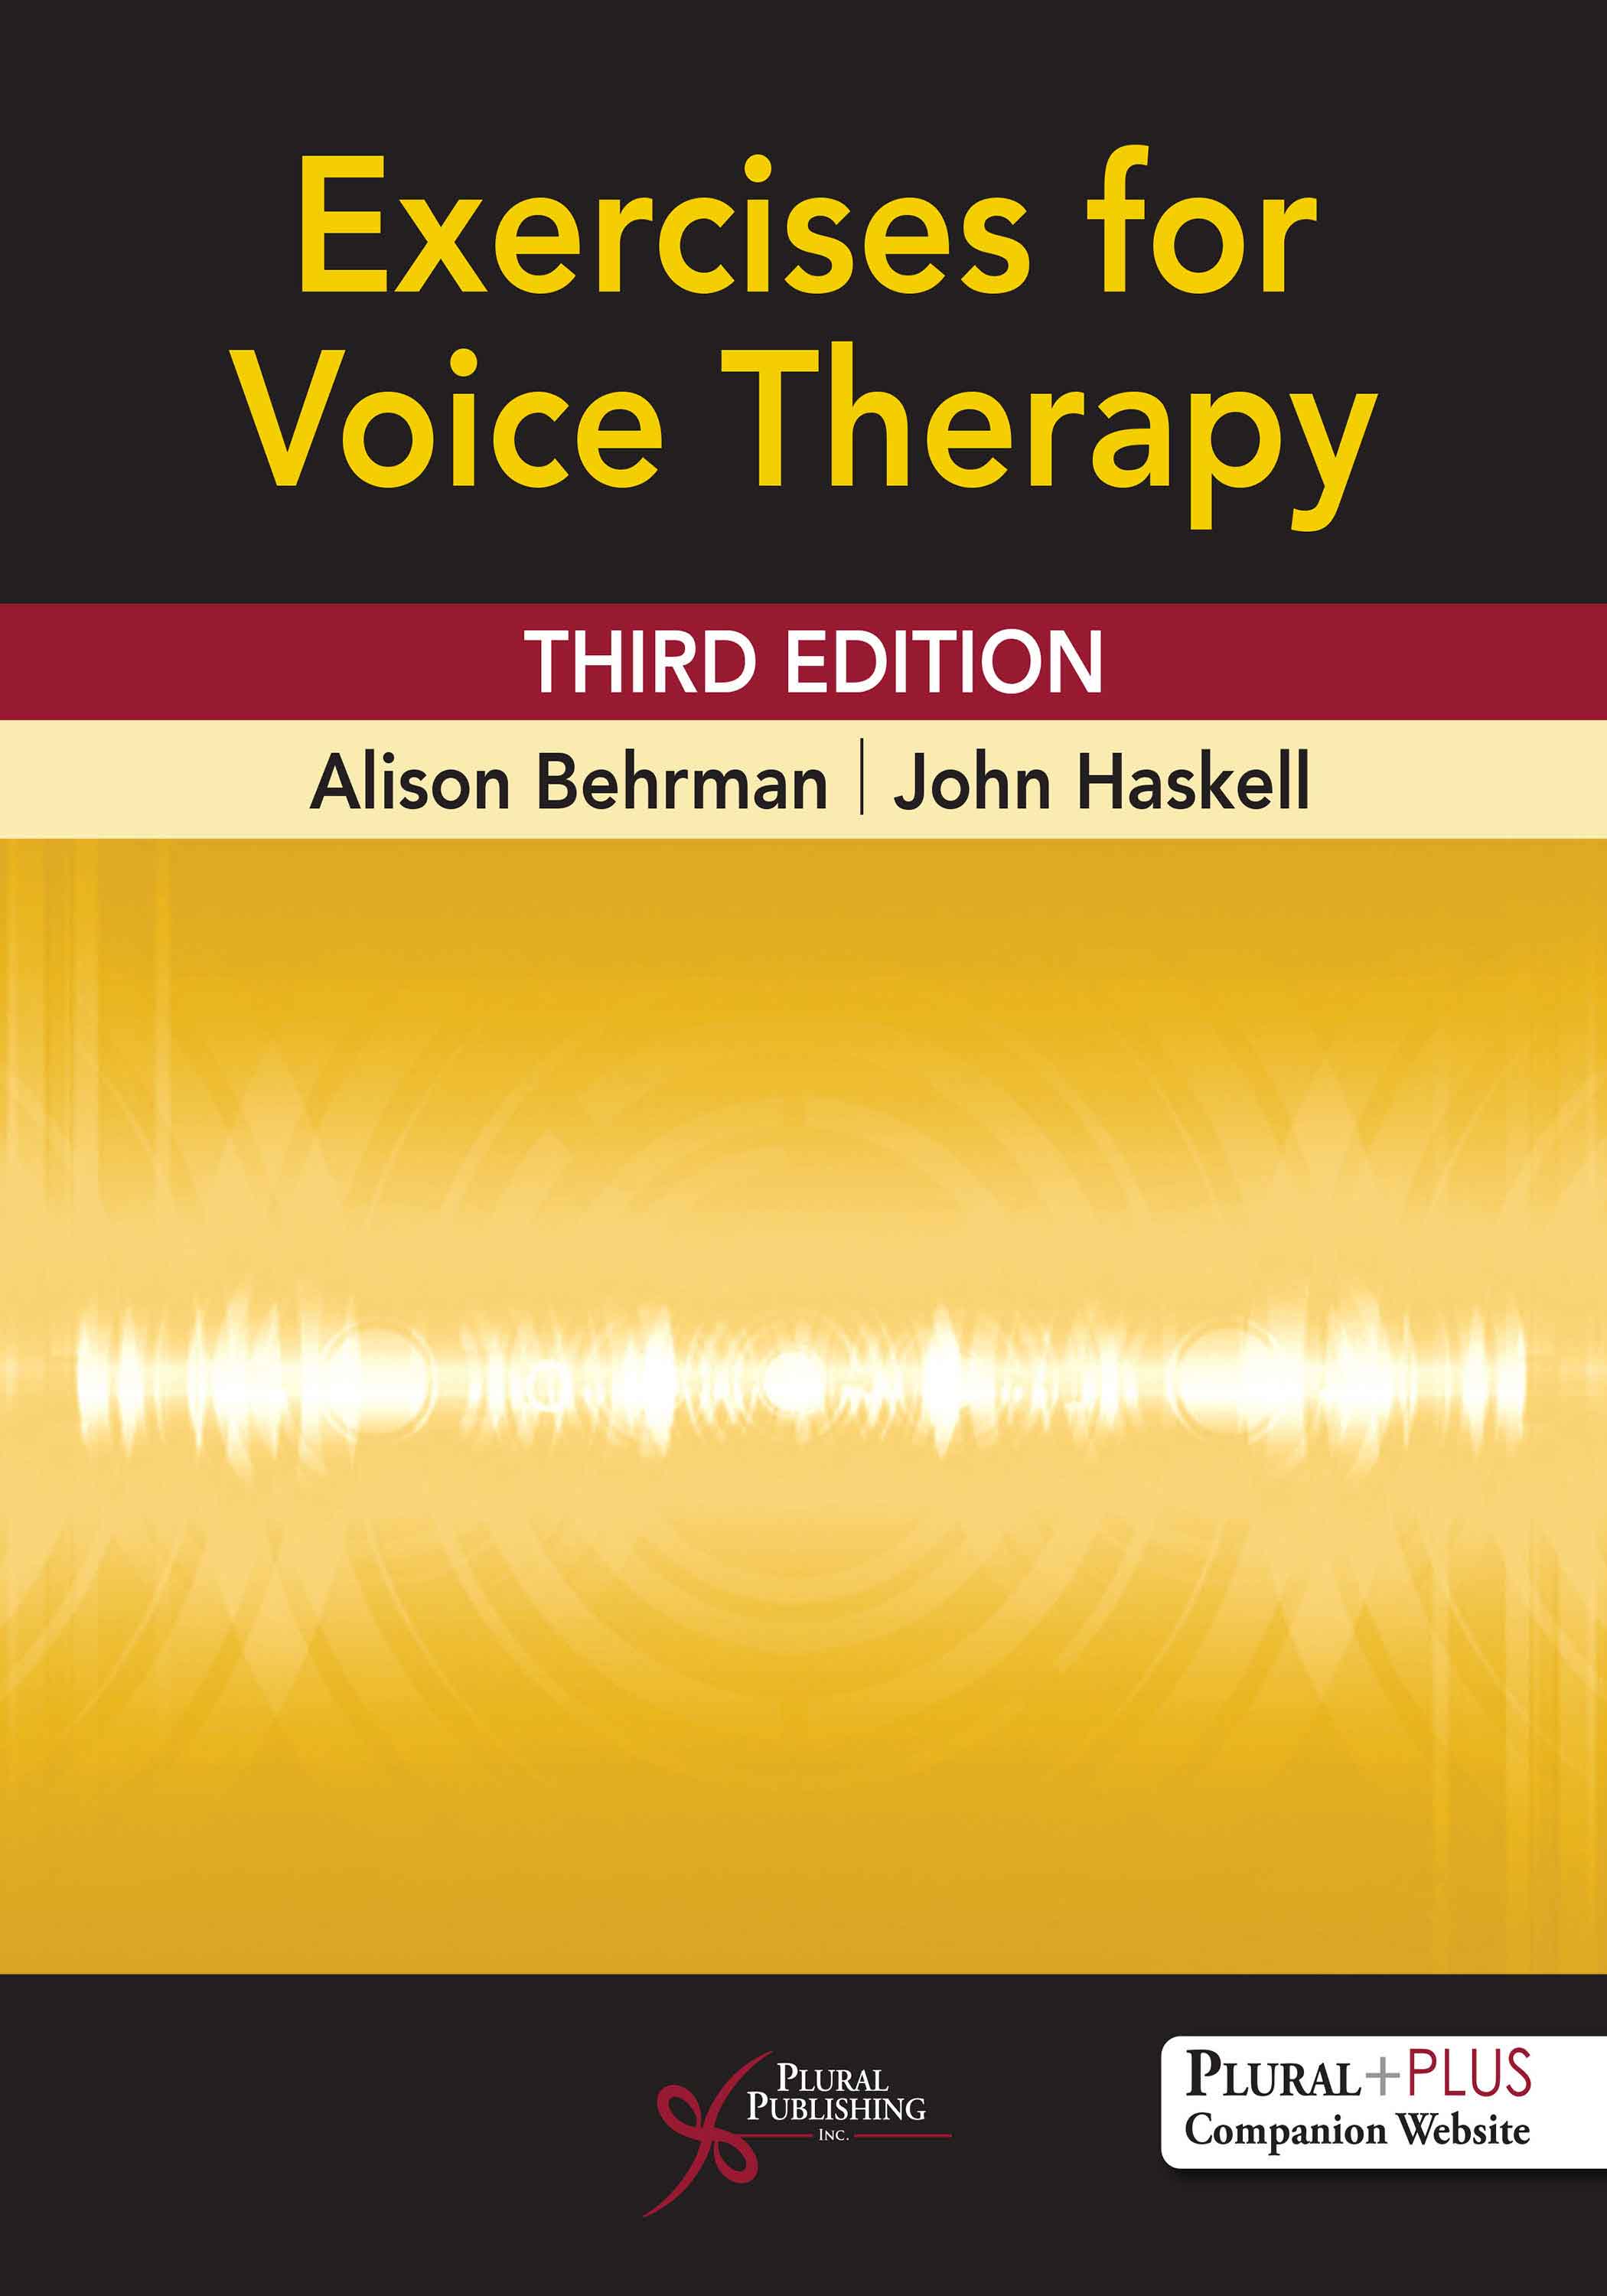 Exercises for Voice Therapy book cover